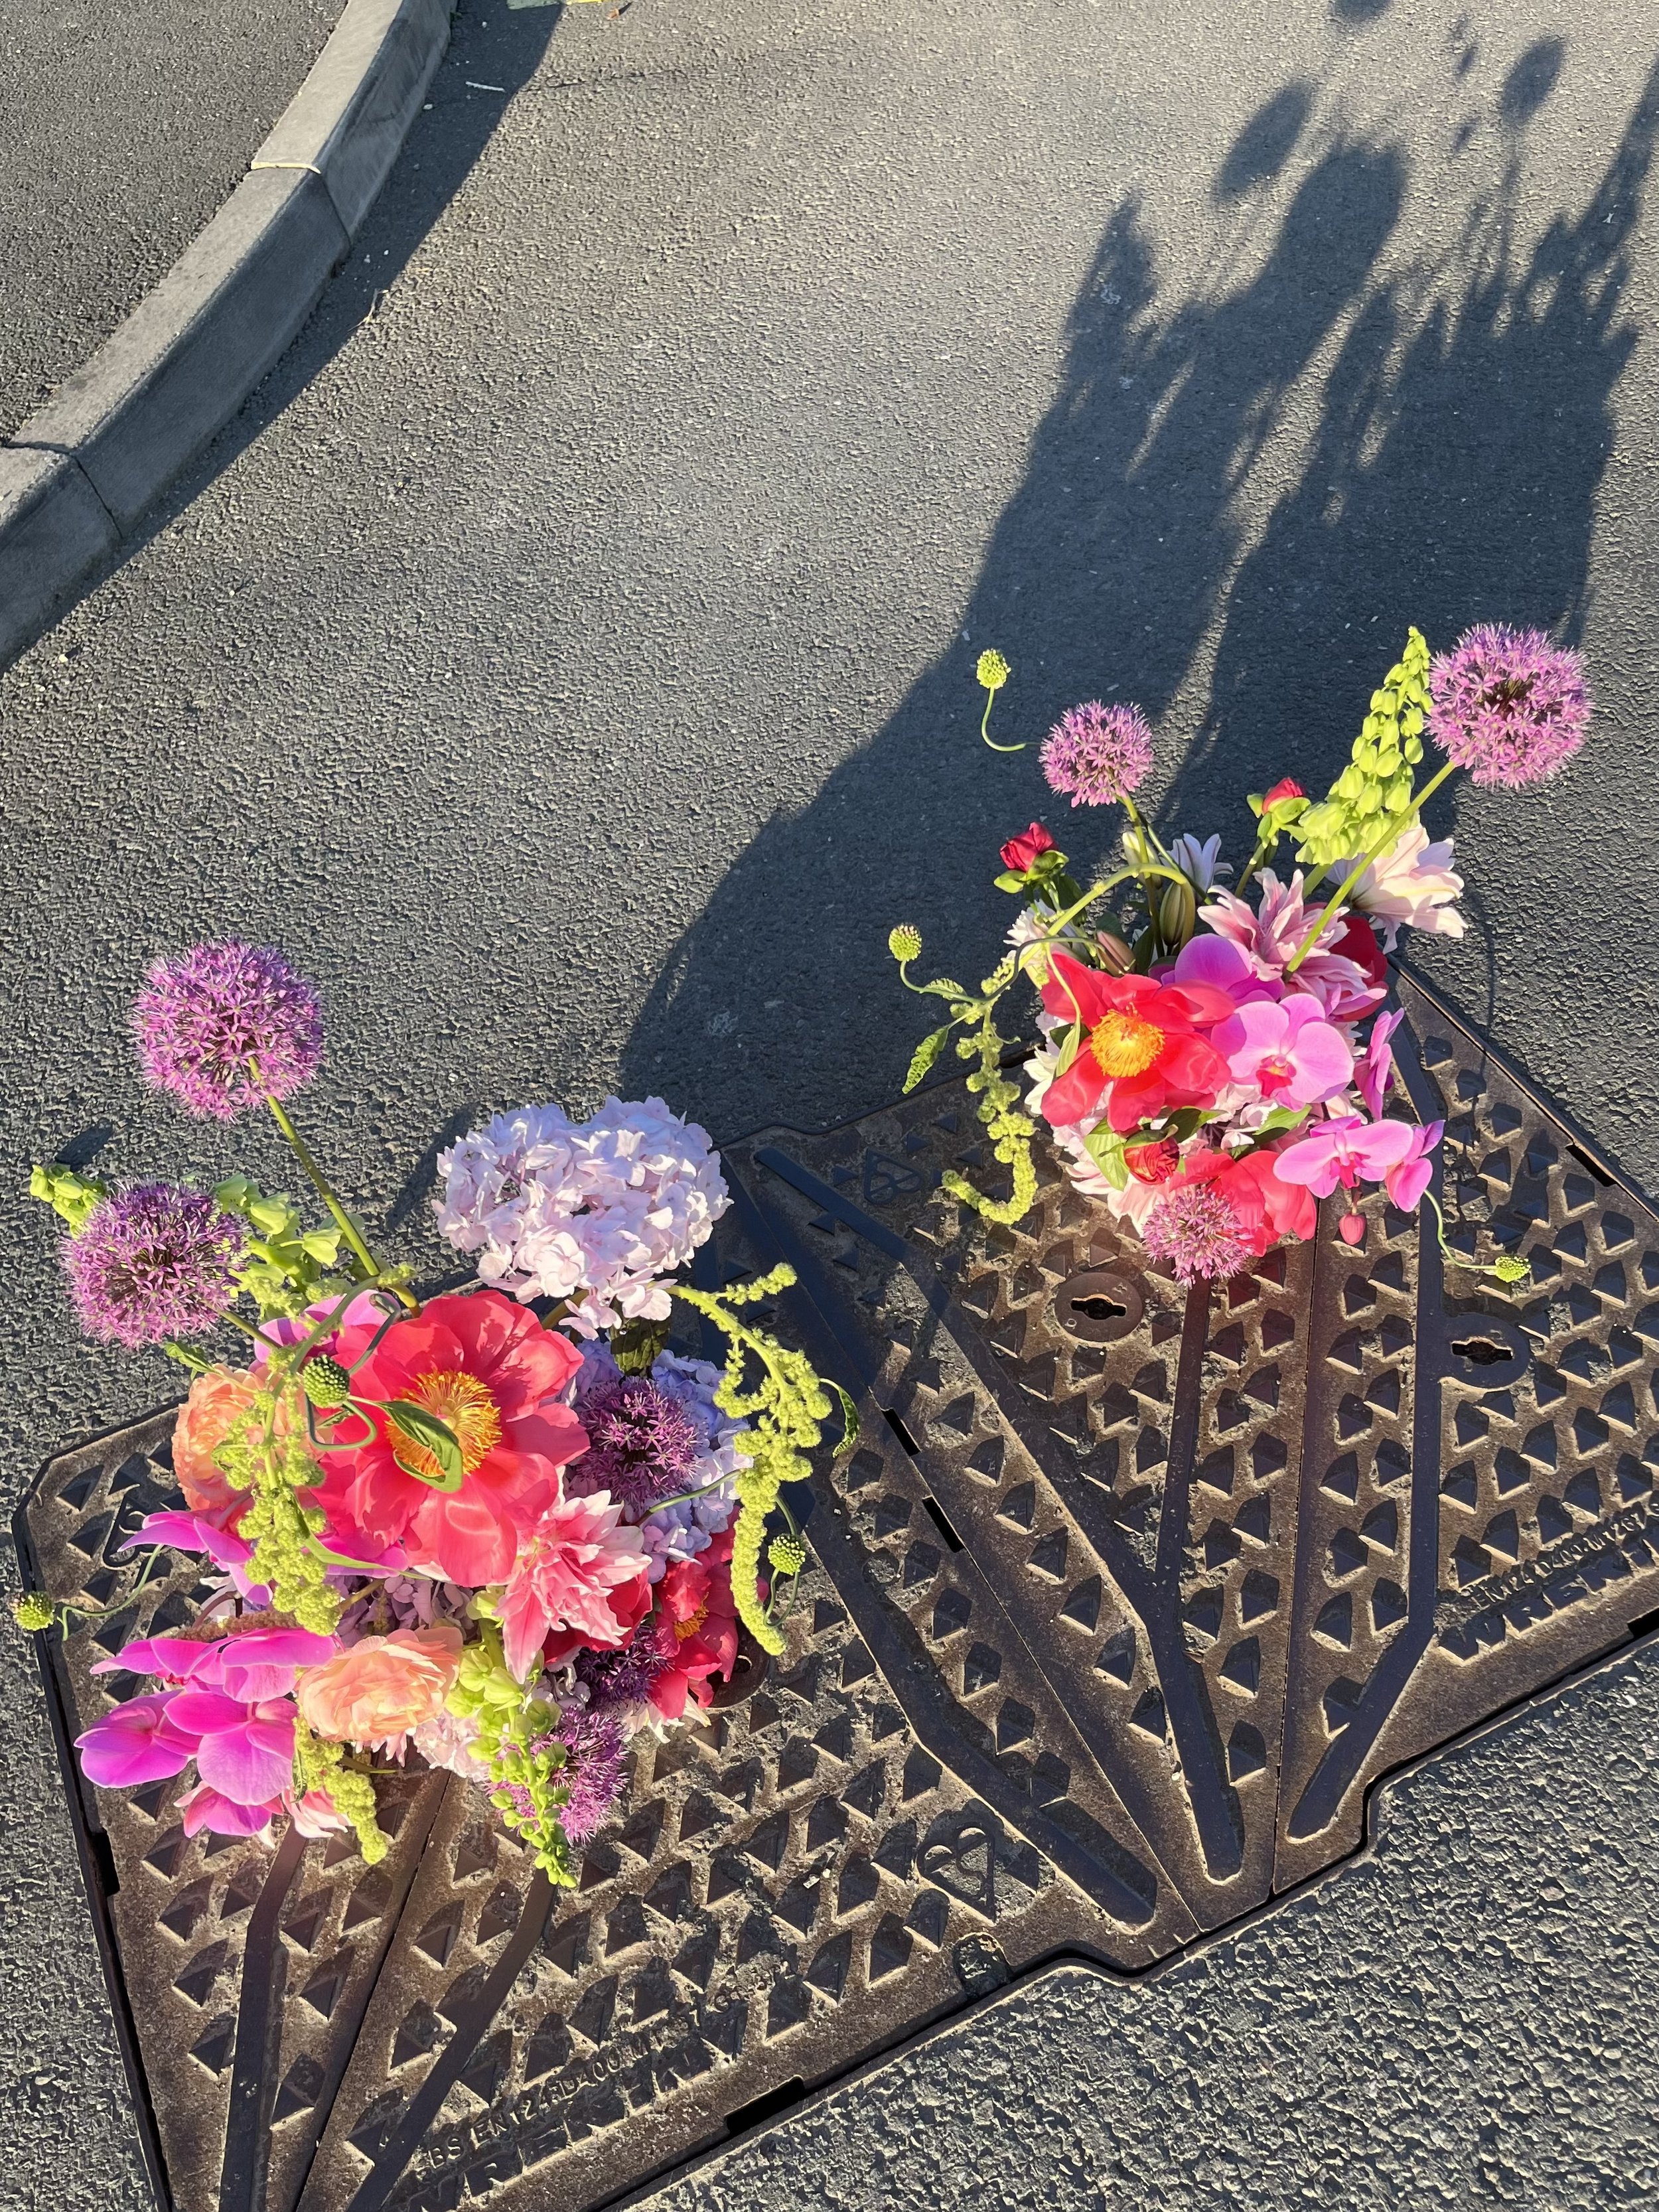  A beautiful juxtaposition has been created by placing the two small, separate but complimentary floral displays next to each other on top of two manhole covers in the road. Bright pink and purple flowers in different sizes and textures are placed al